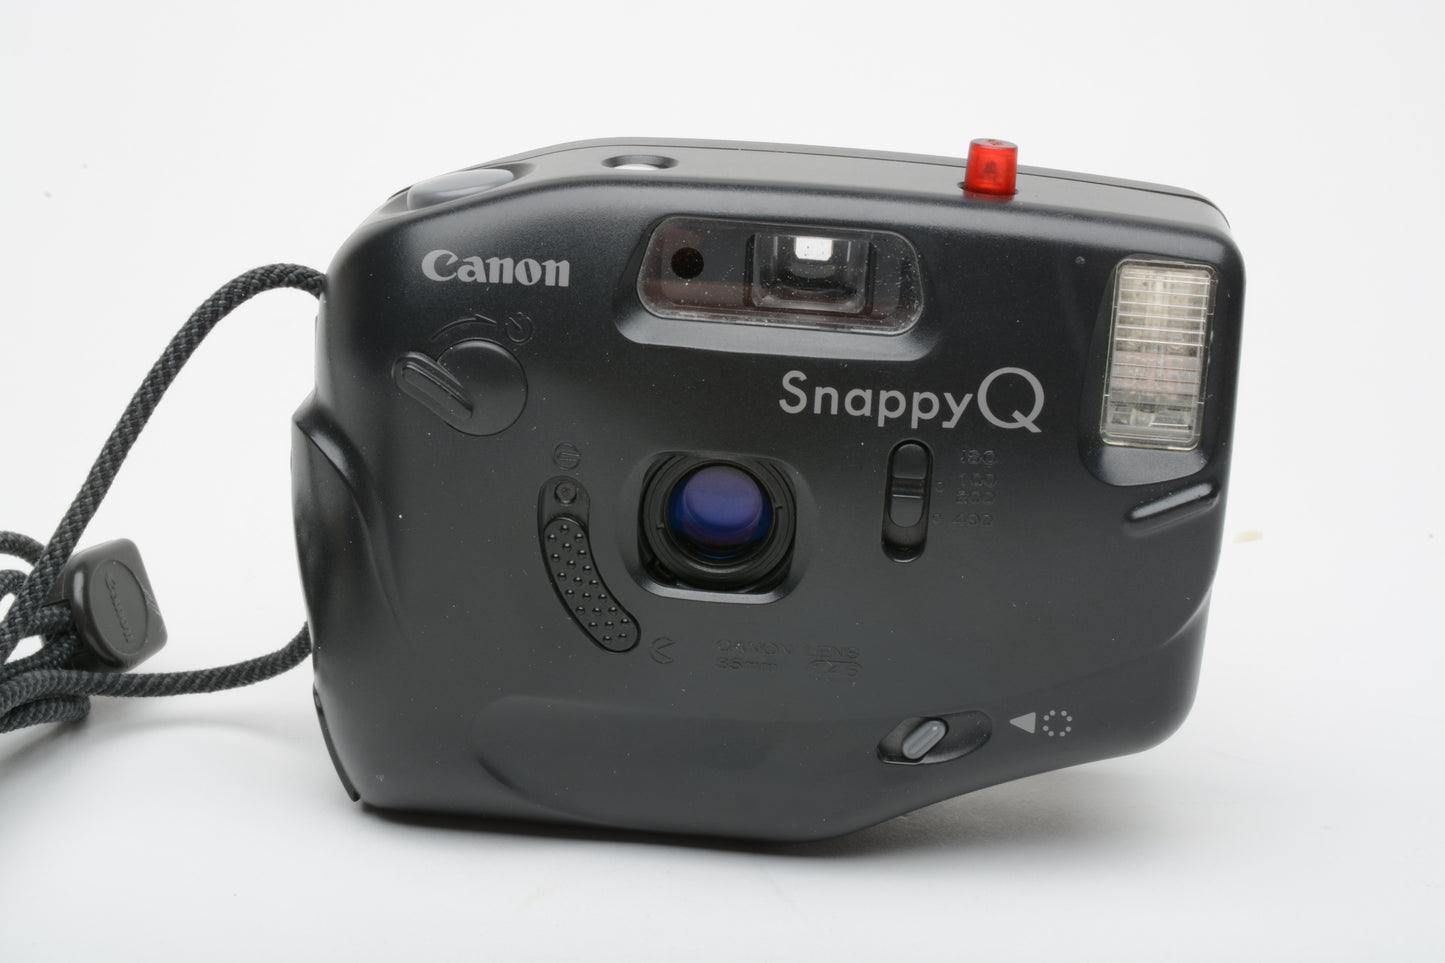 Canon Snappy Q 35mm Point & Shoot camera, pouch+strap, tested